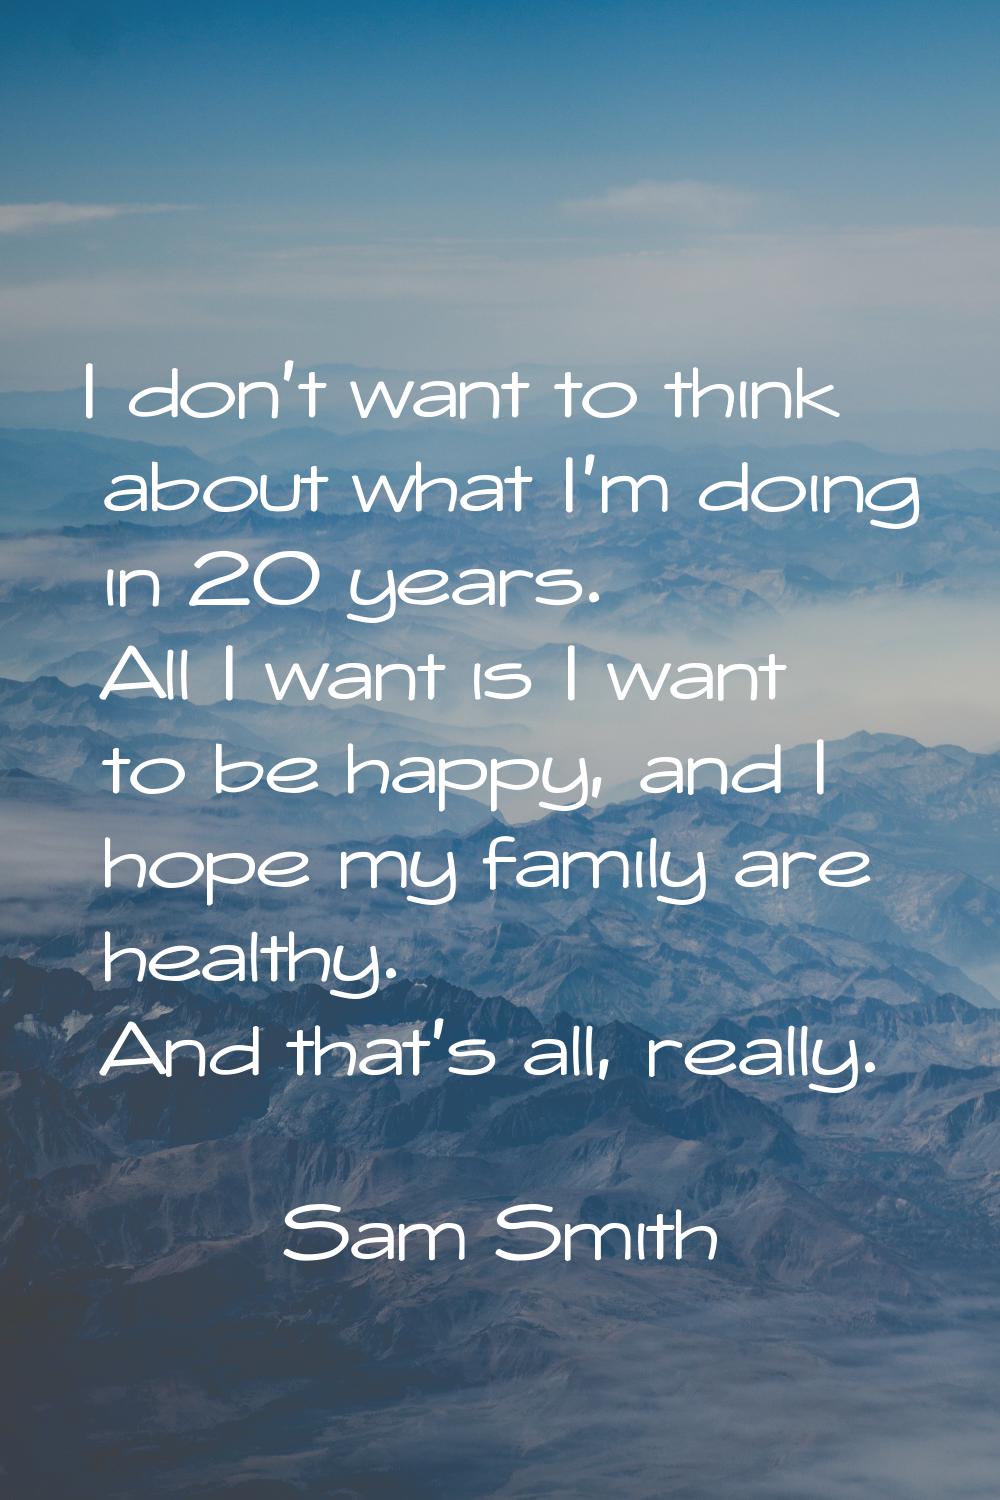 I don't want to think about what I'm doing in 20 years. All I want is I want to be happy, and I hop